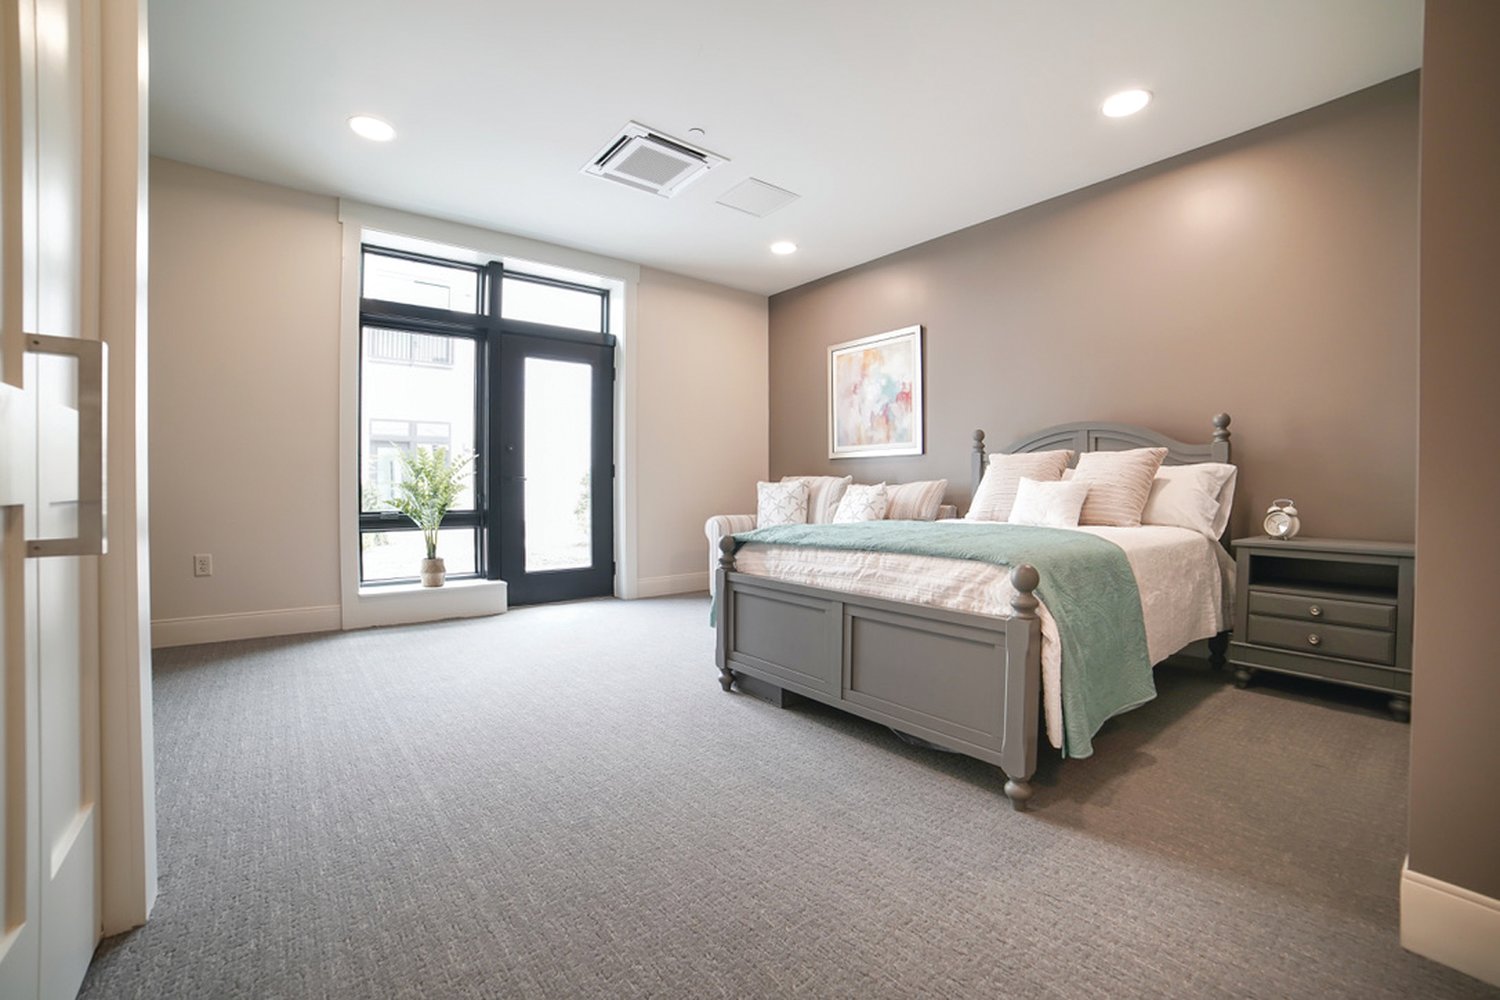 Imagine yourself in this spacious bedroom, filled with your own personal touches and belongings. This is one of the sixty-six apartments found at The Preserve at Briarcliffe in Johnston.  Call 401-944-2450 to schedule your in-person tour today.